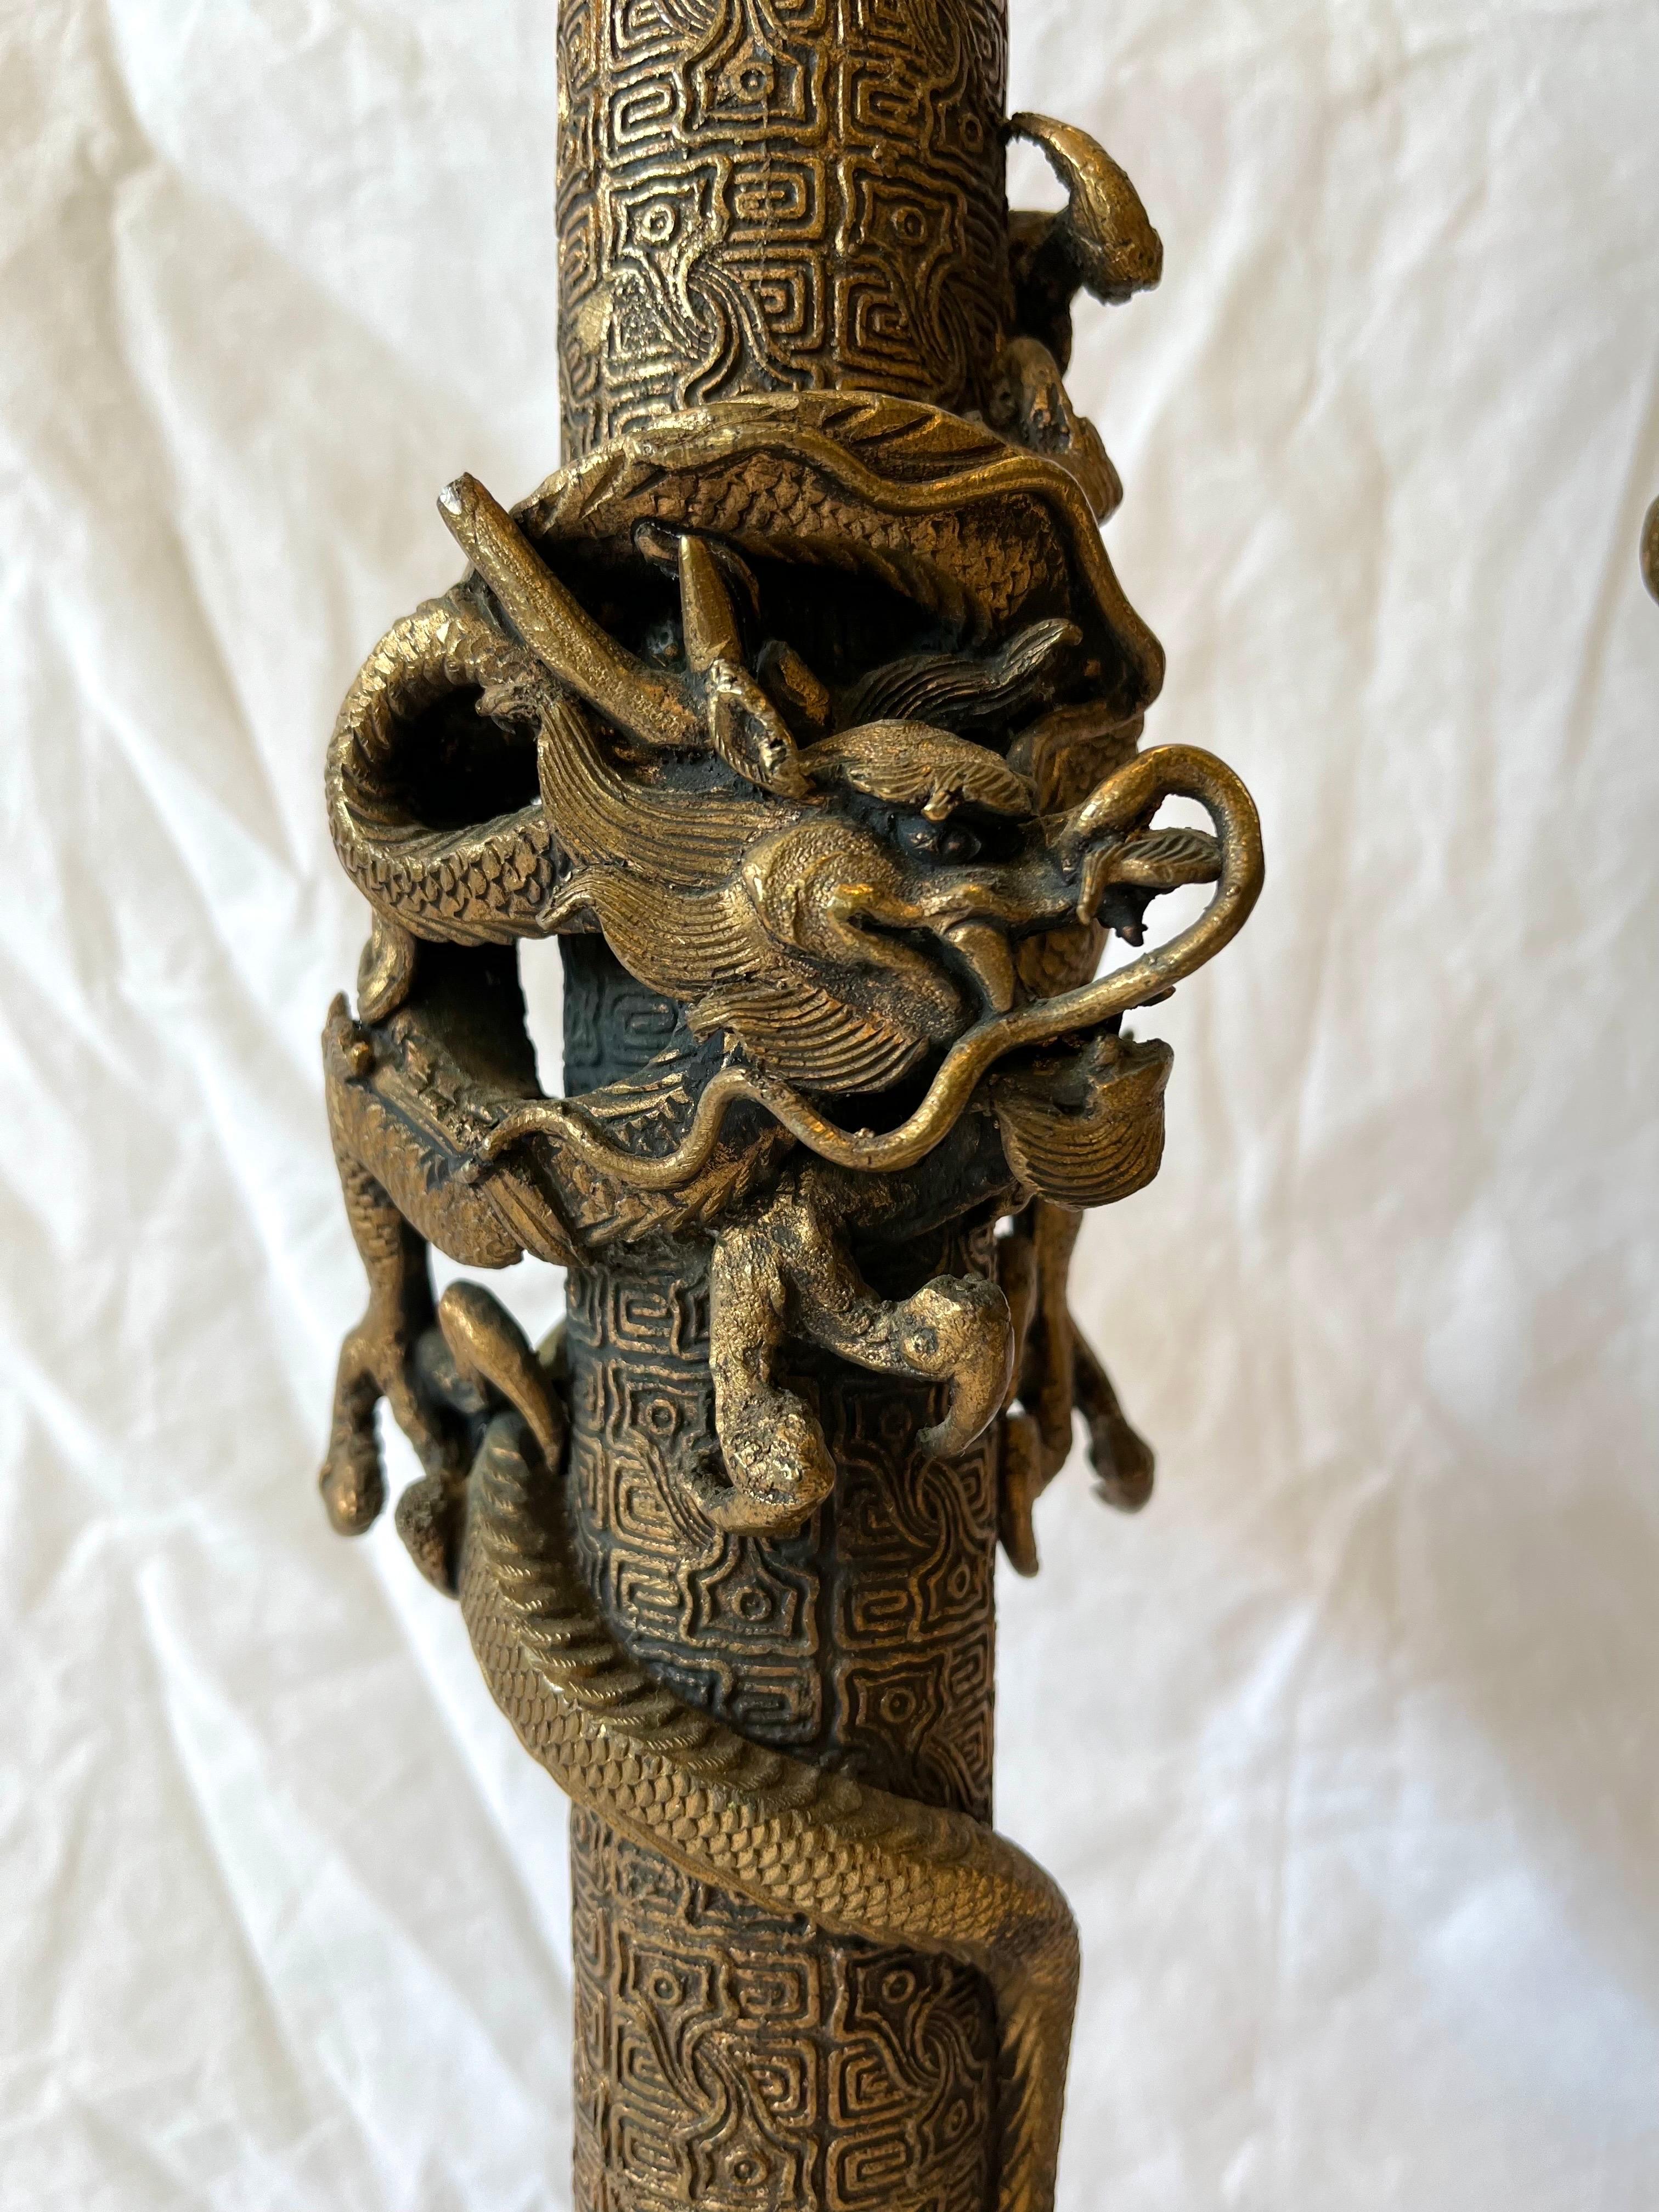 A vintage pair of coiling dragon lamps, their bodies circling a highly detailed circular column. The dragons, one facing the other on each lamp, are presented in a beautifully detailed high relief sculptural aesthetic. Each of the lamps is on a